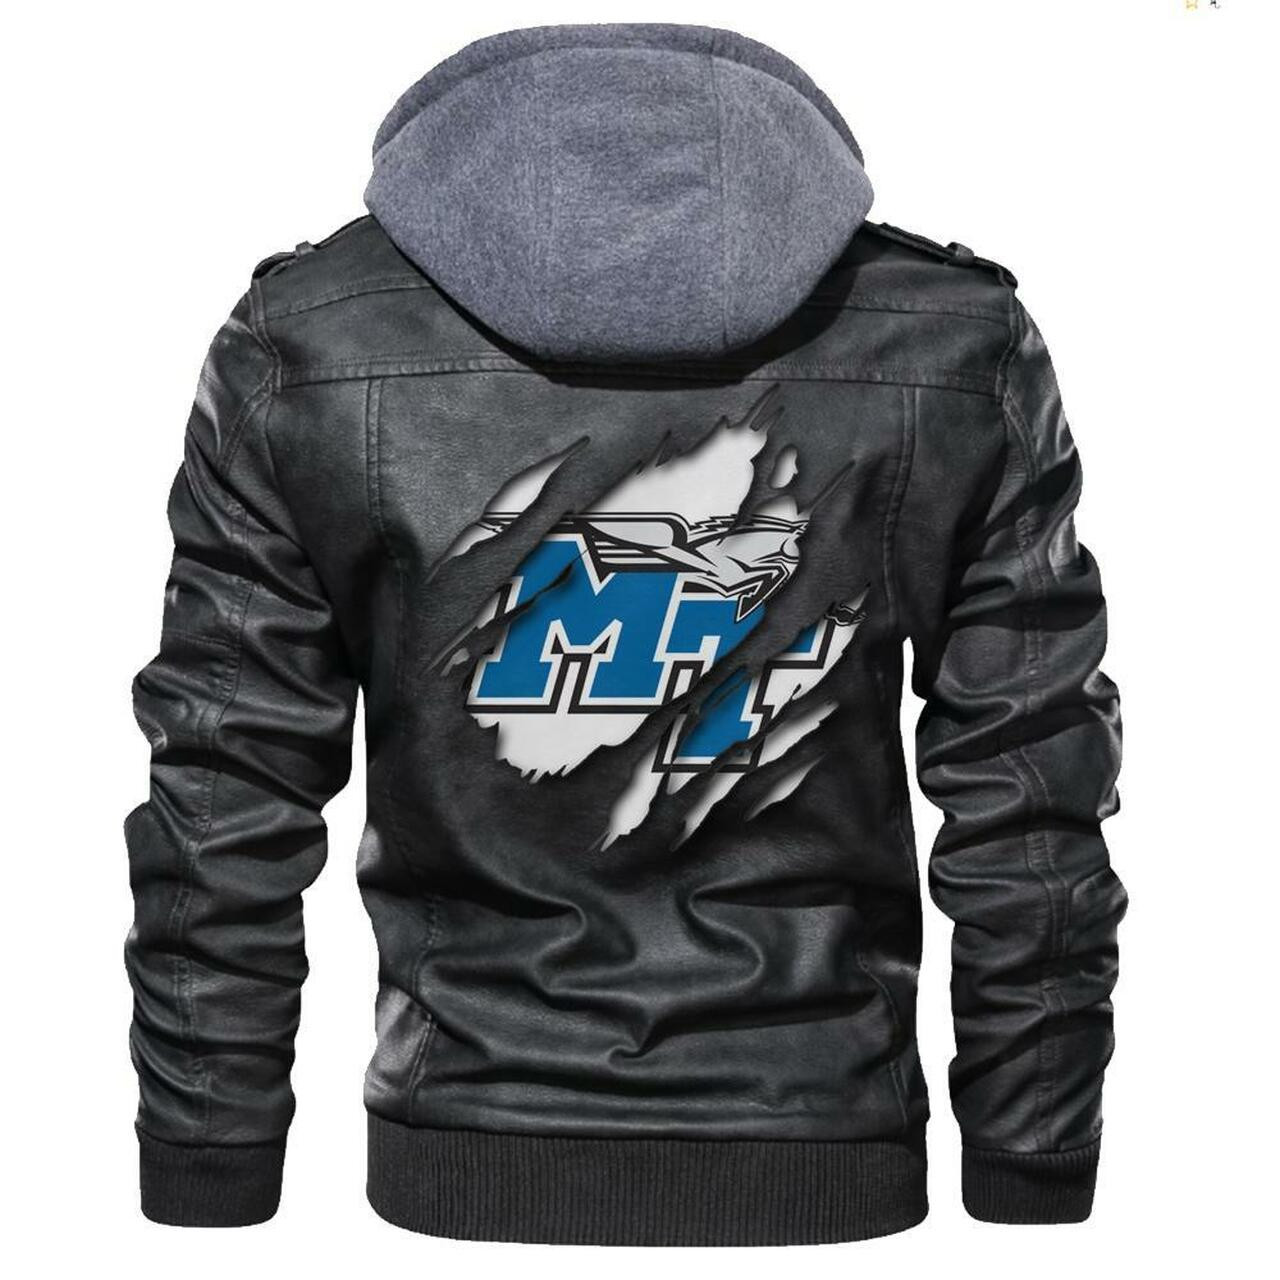 Top 200+ leather jacket so cool for your man 243